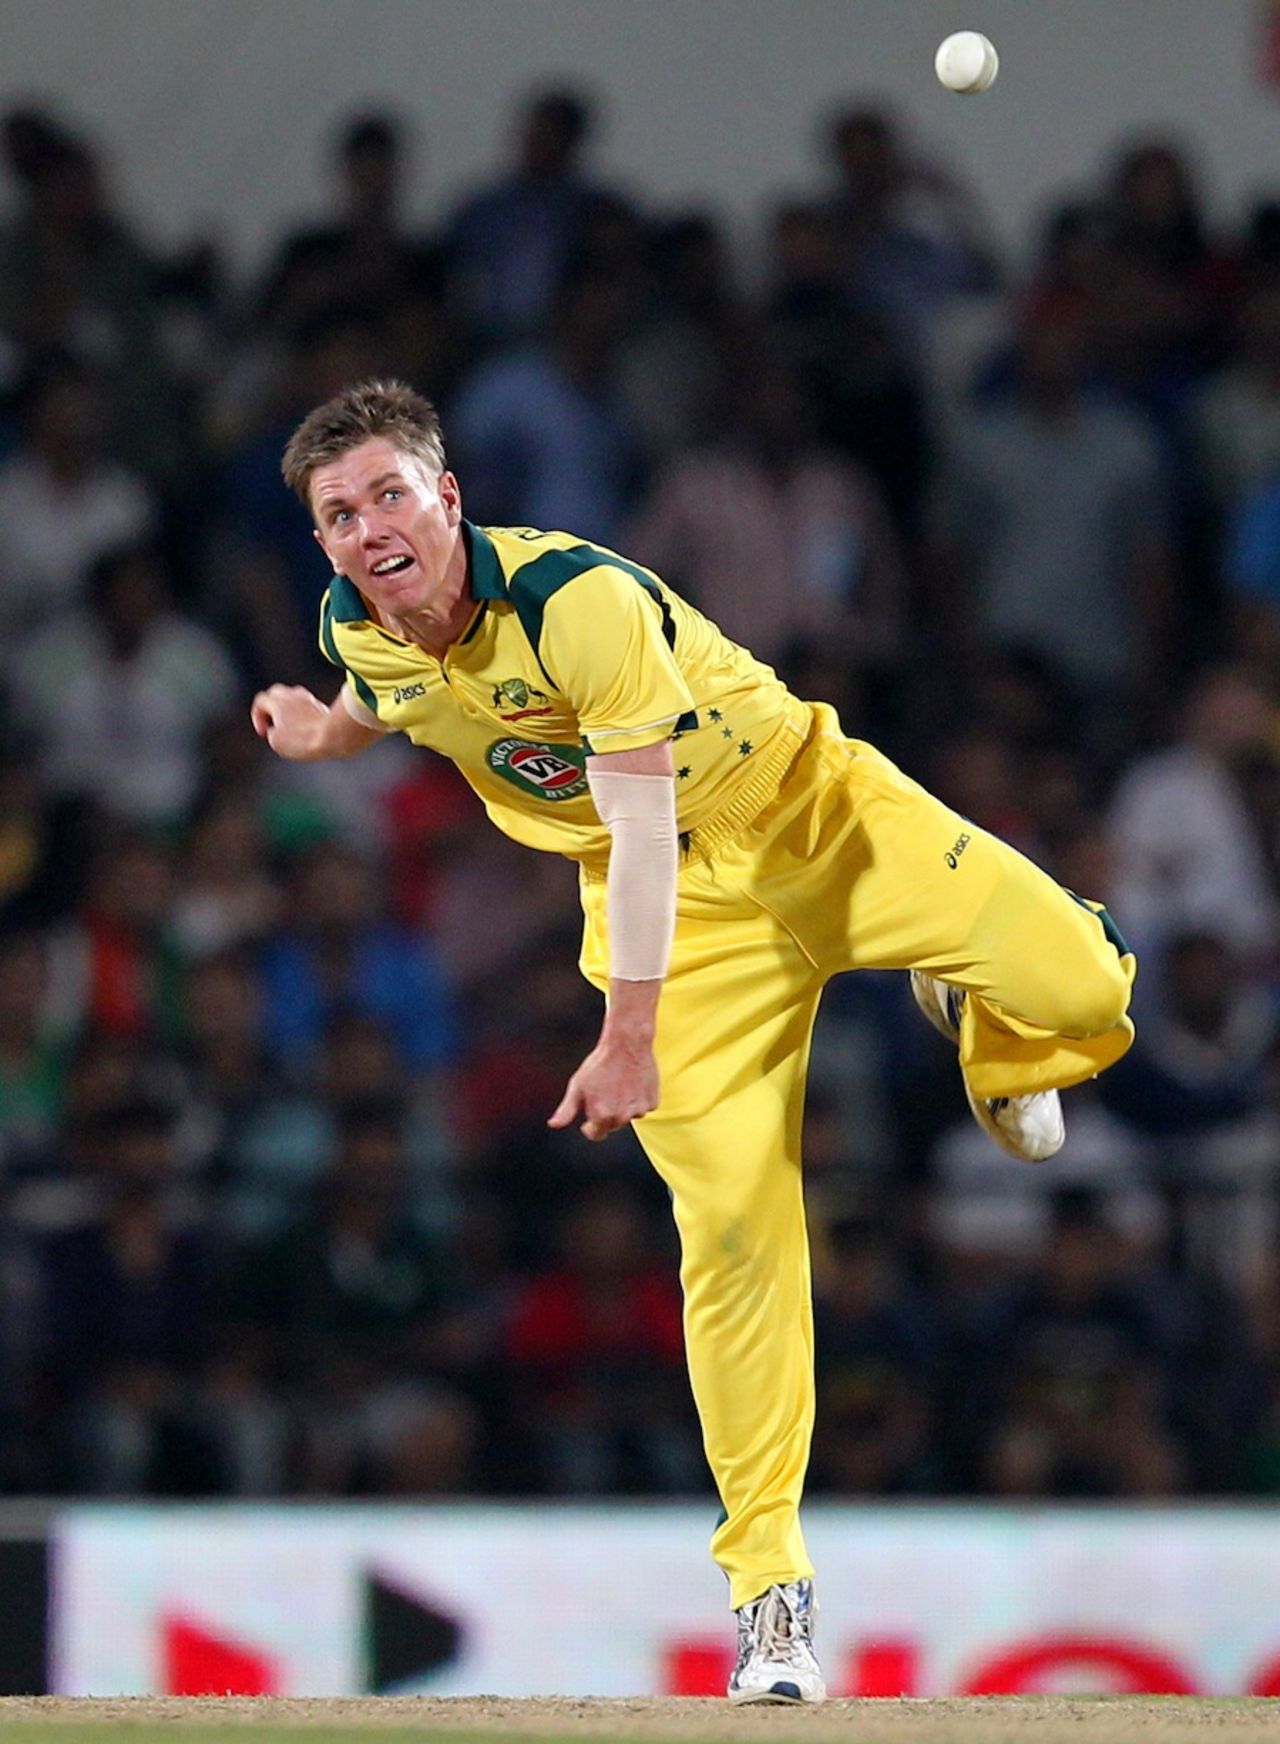 Xavier Doherty releases during his delivery stride, India v Australia, 6th ODI, Nagpur, October 30, 2013